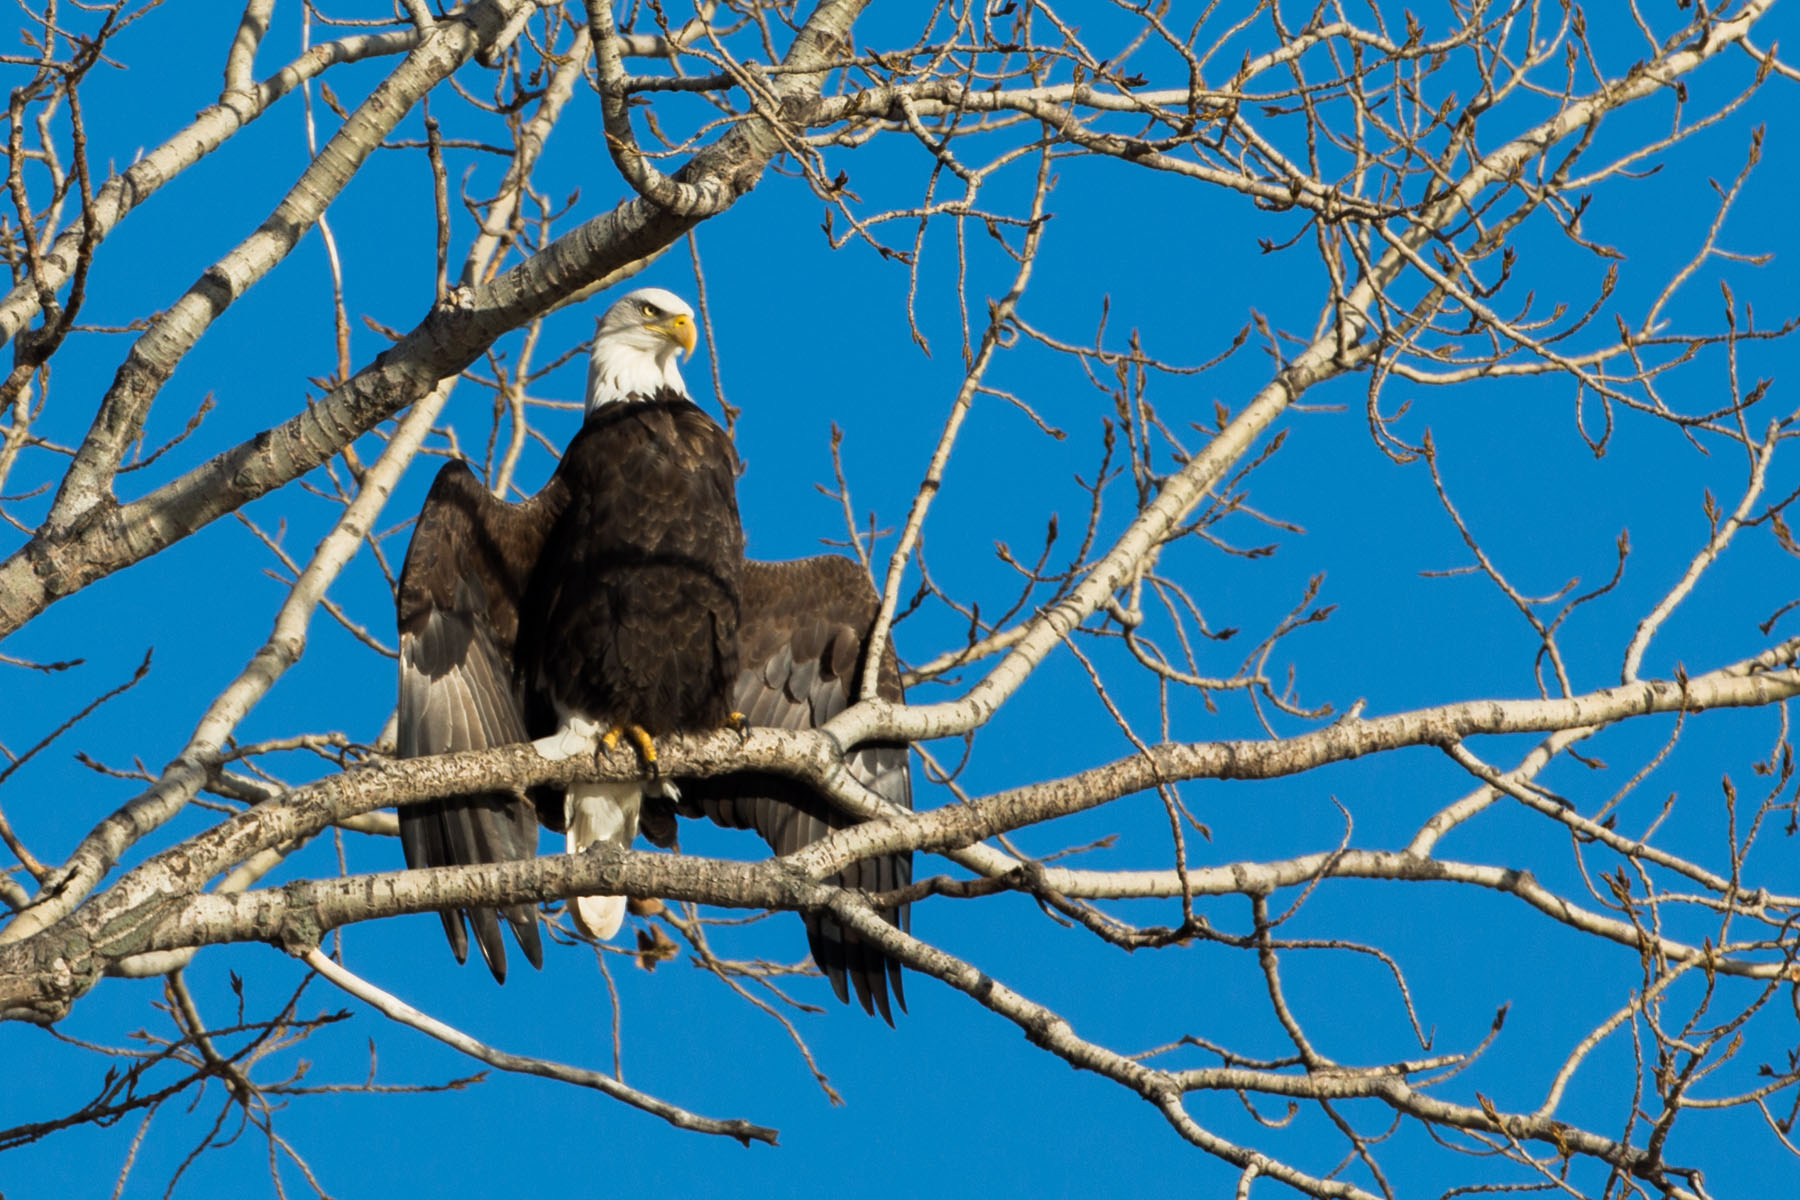 Bald Eagle catching some rays to warm up, Loess Bluffs NWR.  Click for next photo.